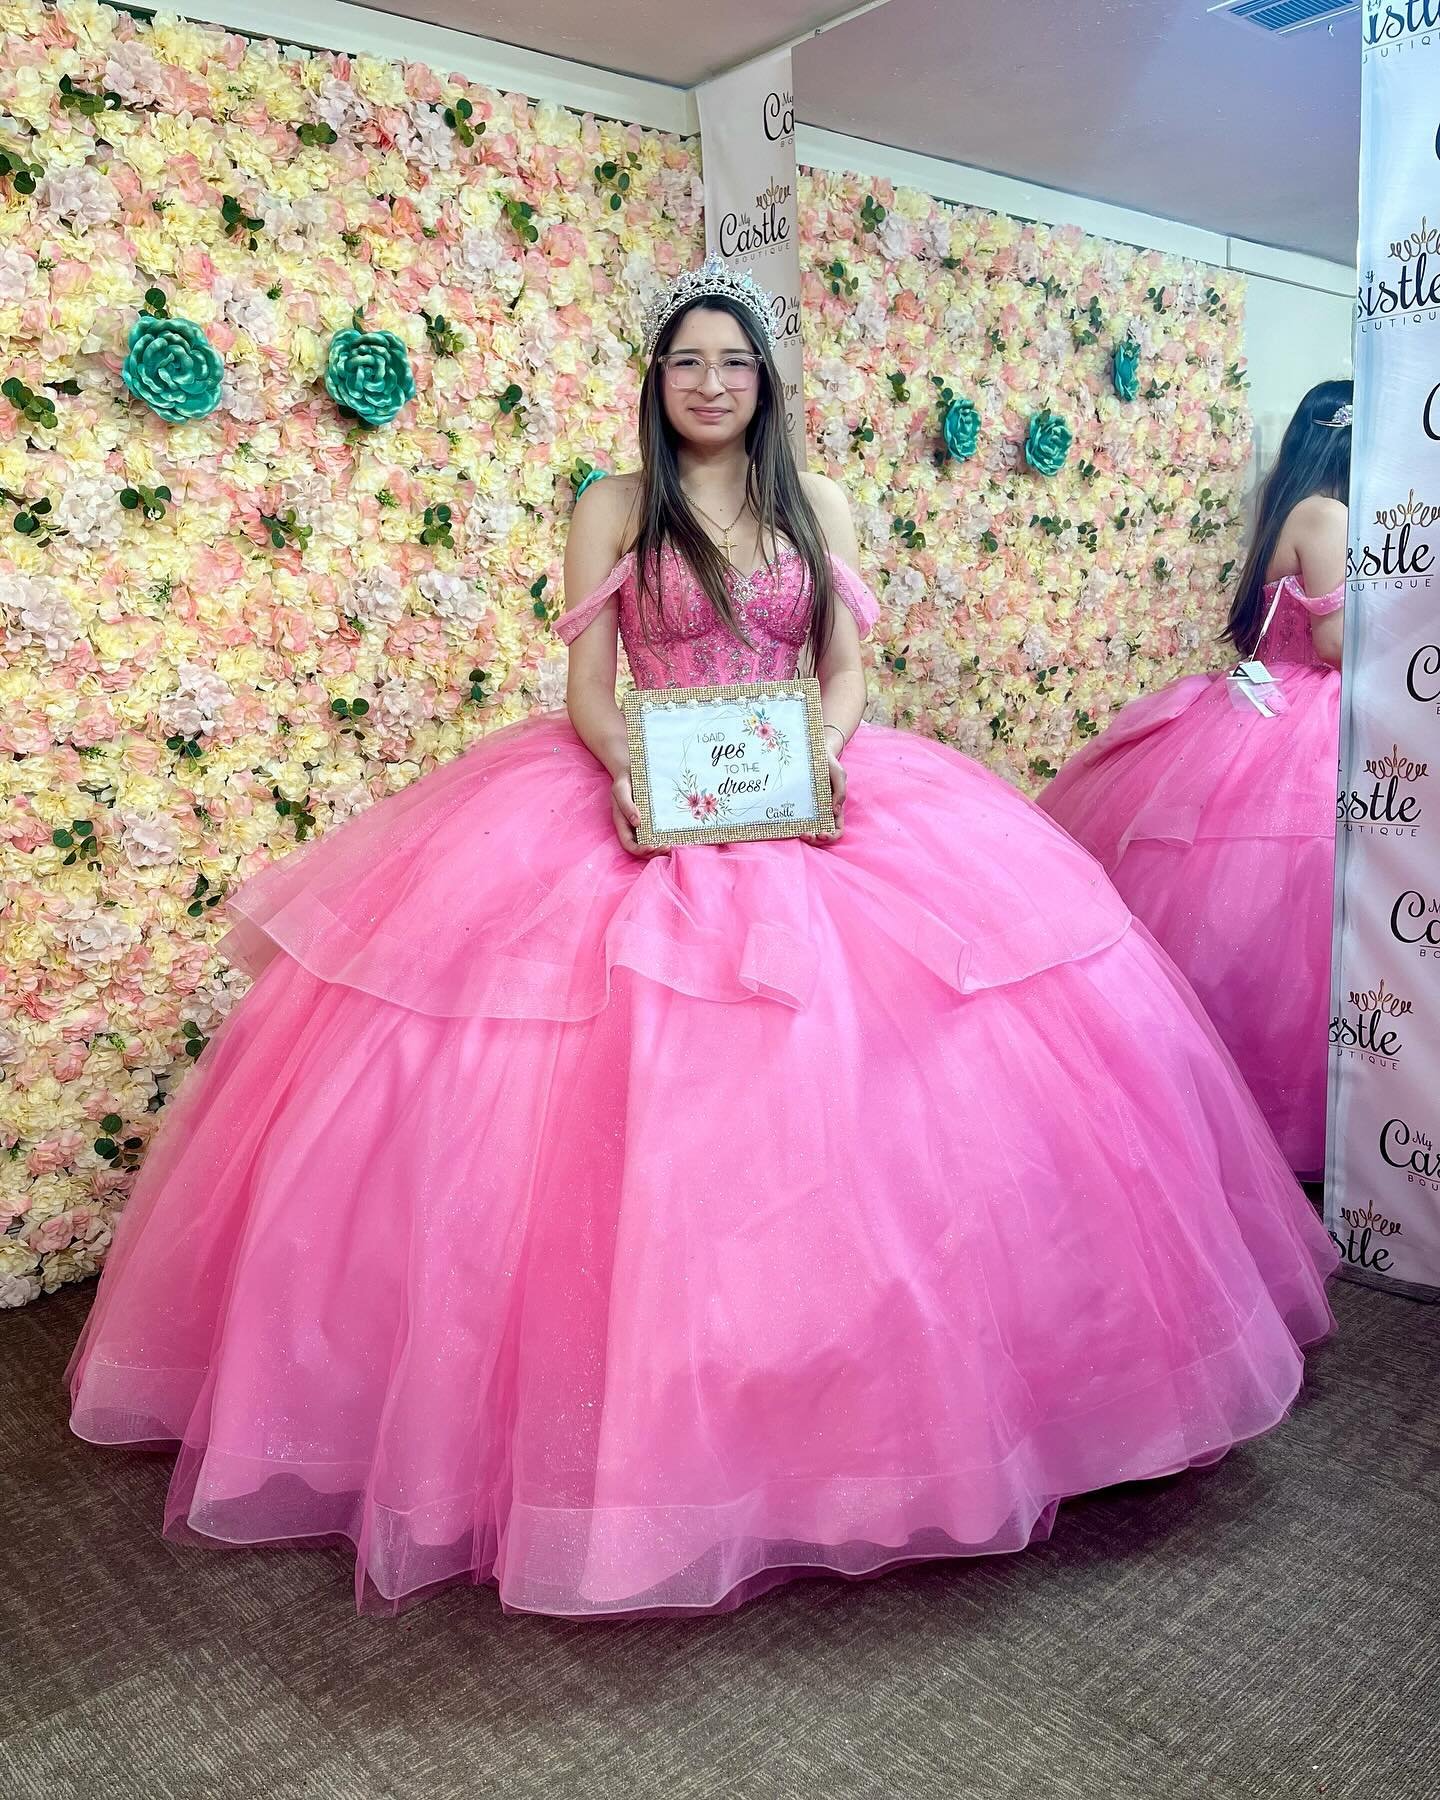 She said yes to the dress! 🩷
✨
✨ ✨
✨✨
✨✨✨
✨✨✨✨
✨✨✨✨✨
✨✨✨✨
✨✨✨
✨✨
✨
#mycastleboutique #pearland #pearlandtx #quincea&ntilde;era #quinceanera #quince #ballgown #sweet15 #dresses #partydress #vestidosdequince #xv #prom #dress #quinceaneradress #quincea